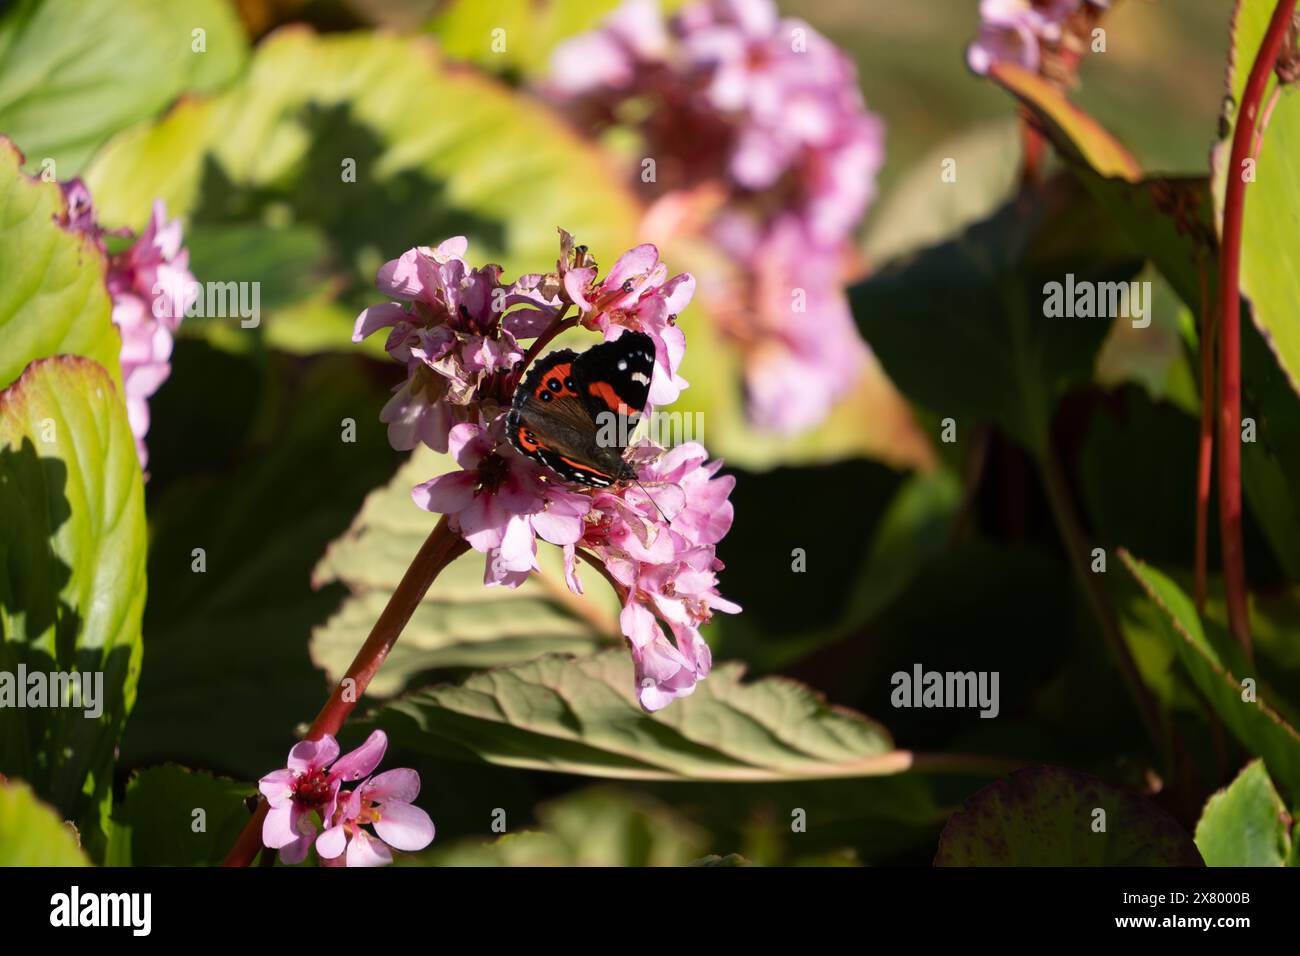 New Zealand red admiral butterfly (Vanessa gonerilla). It is feeding on a cluster of pink bergenia flowers. Stock Photo